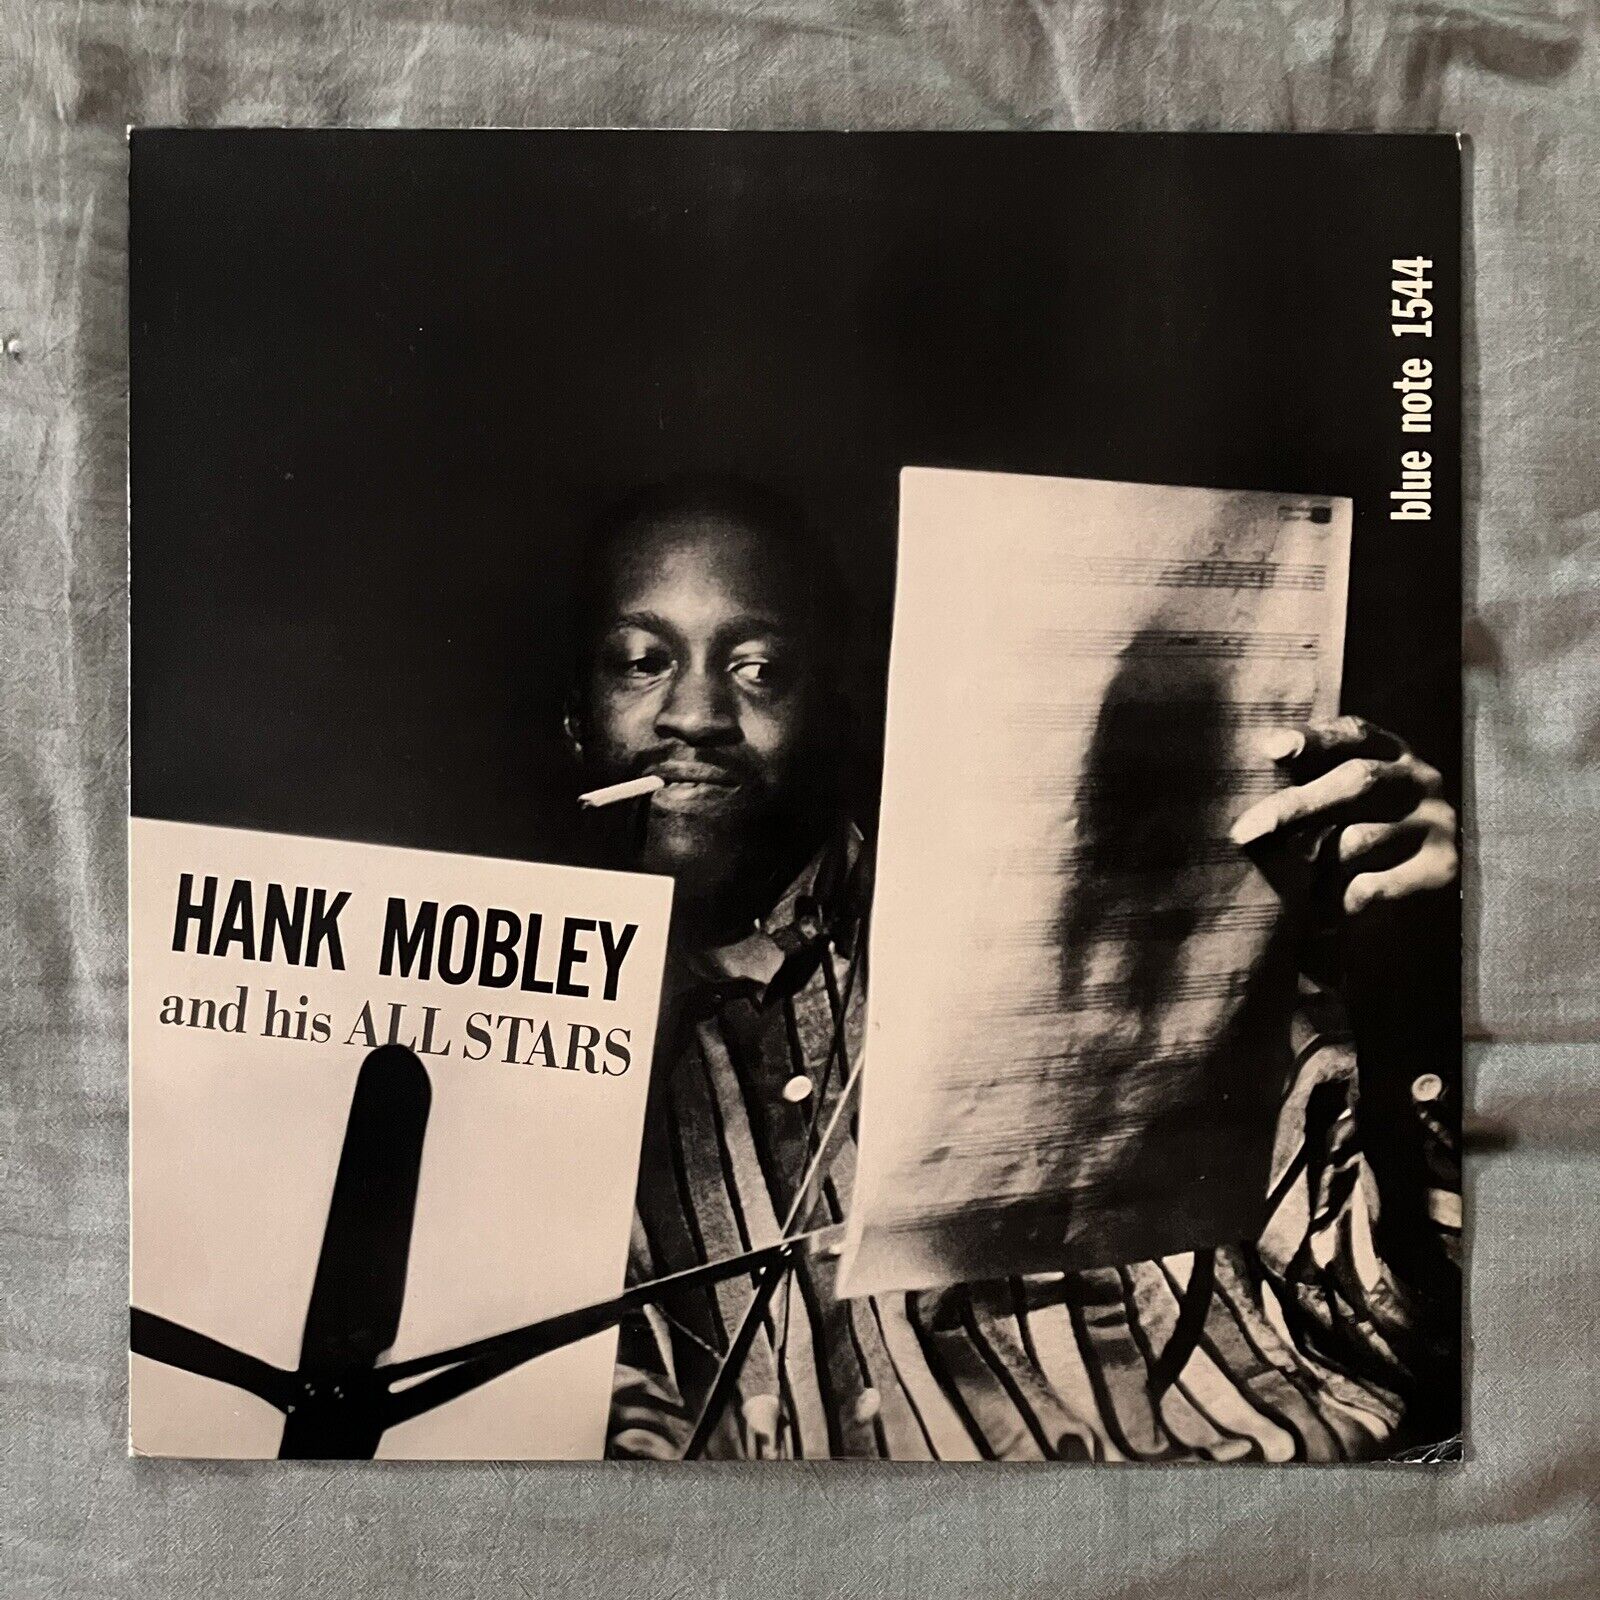 Hank Mobley And His All Stars Blue Note Japan Press Vinyl LP